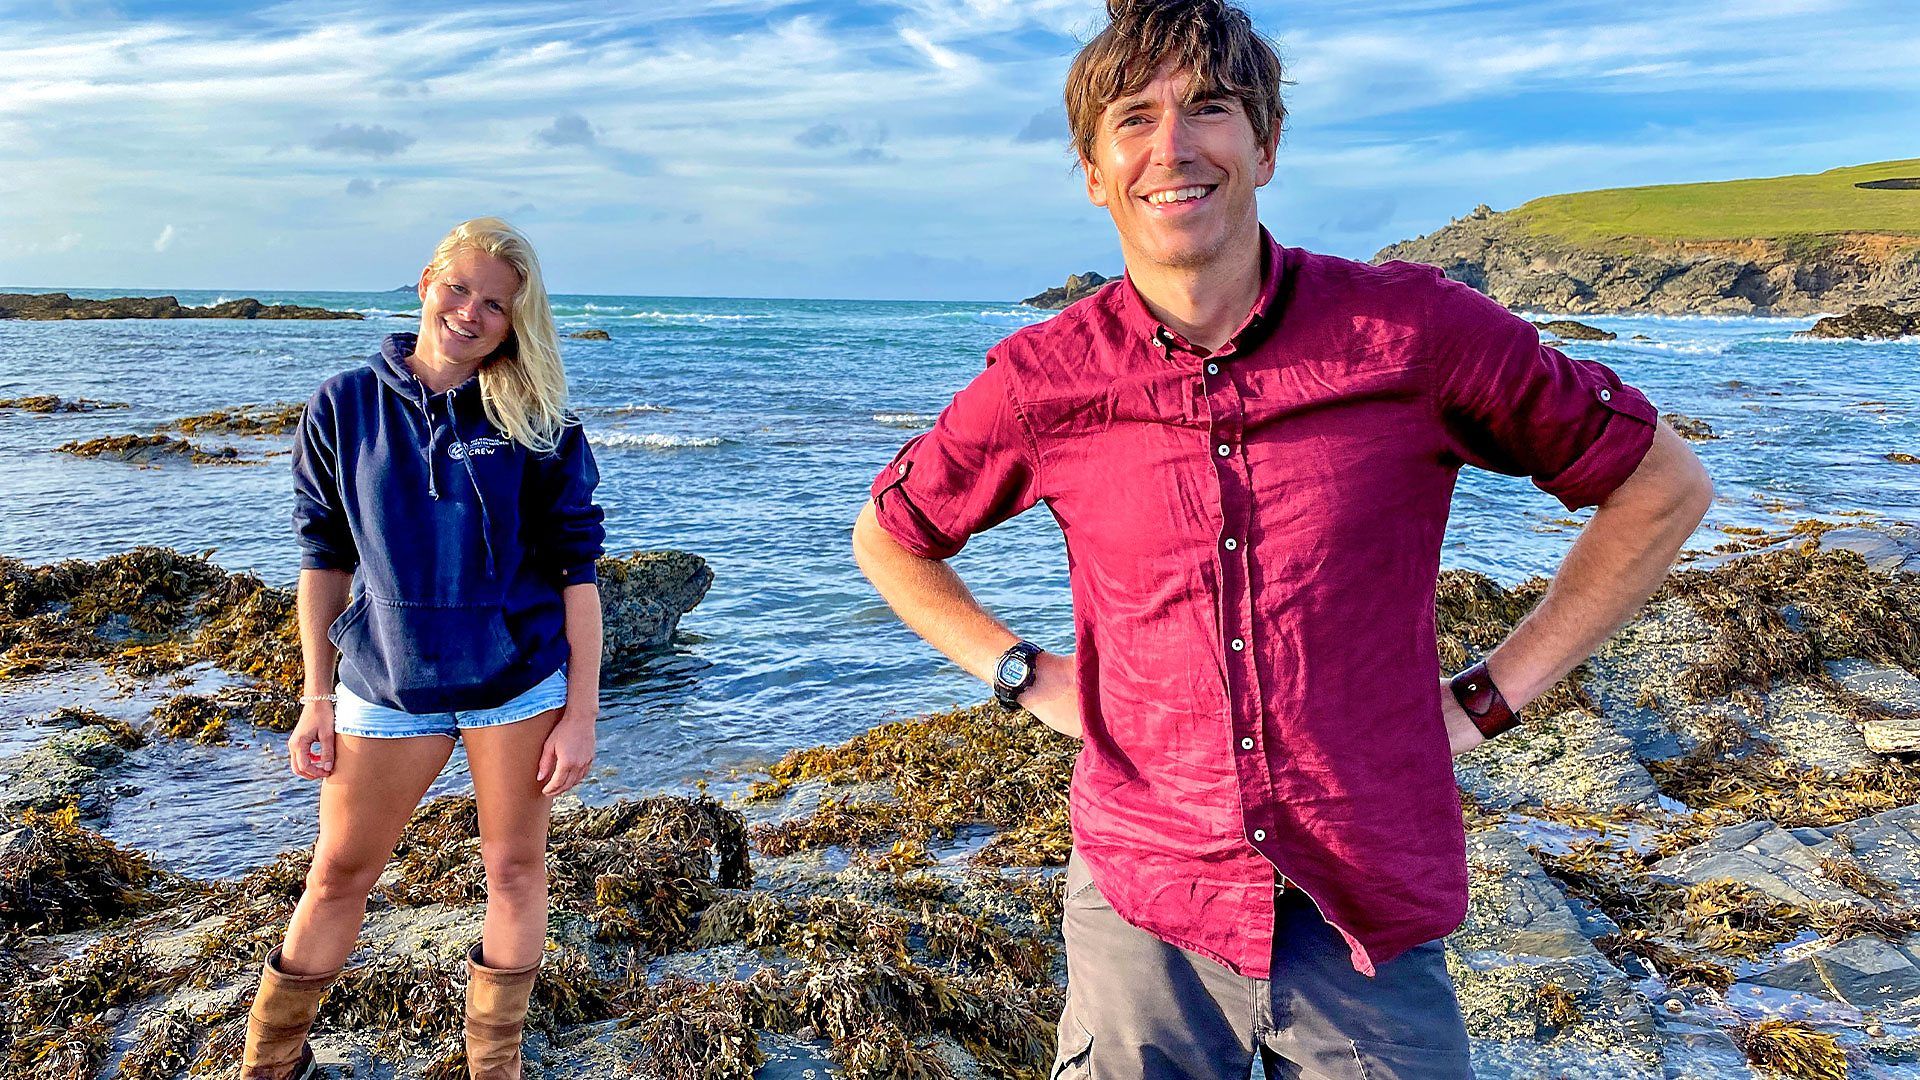 Cornwall with Simon Reeve S1E2 Episode 2